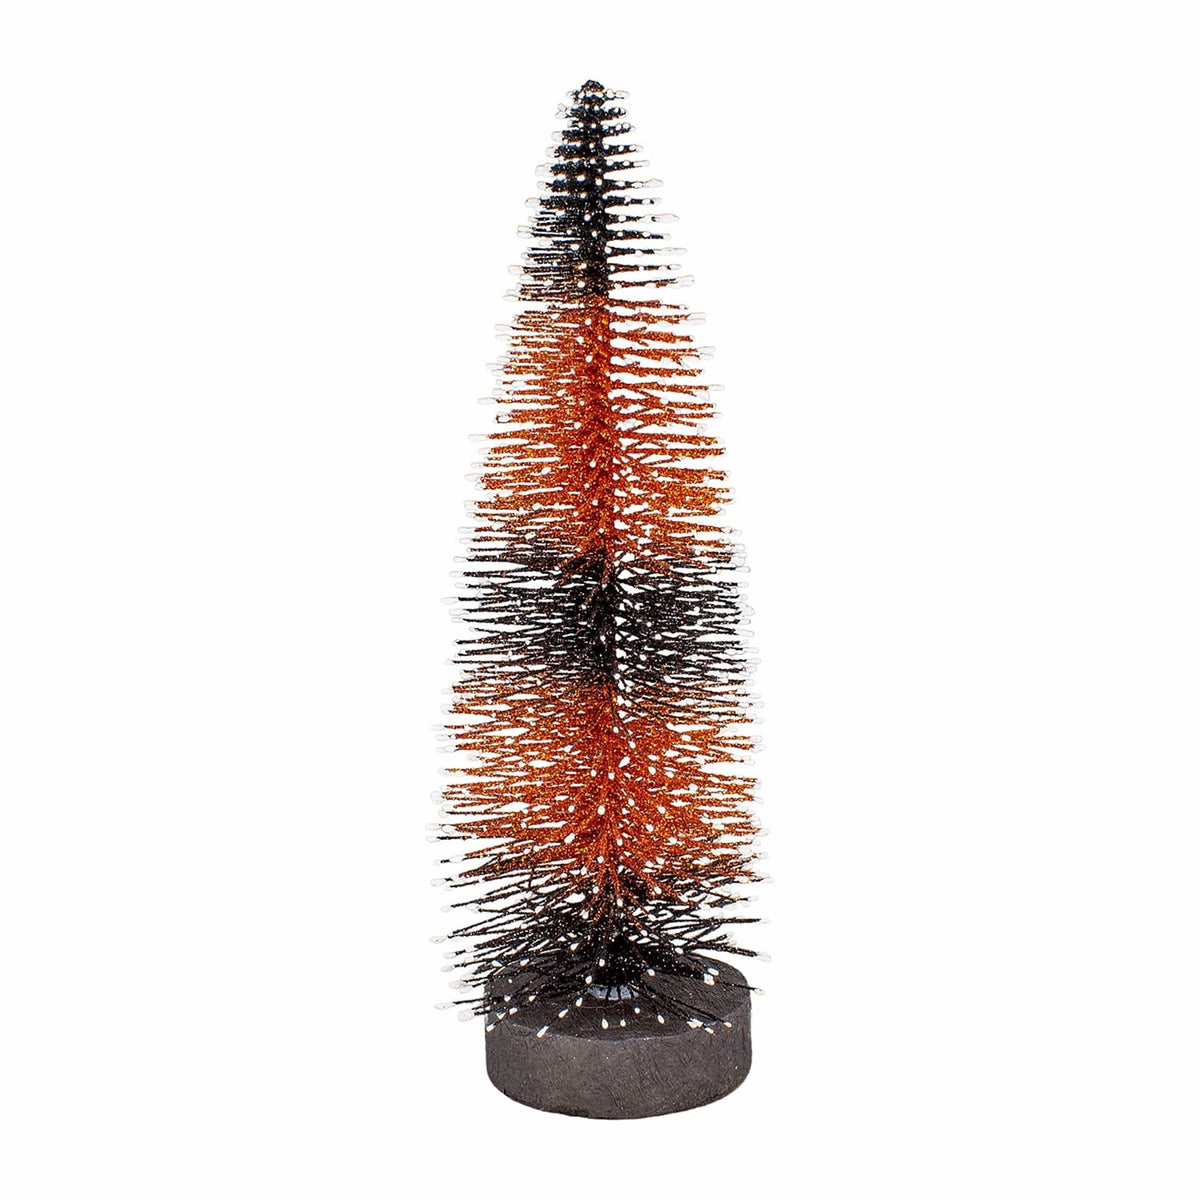 Orange &amp; Black Bottle Brush Trees Available in 10&quot; or 8&quot; High